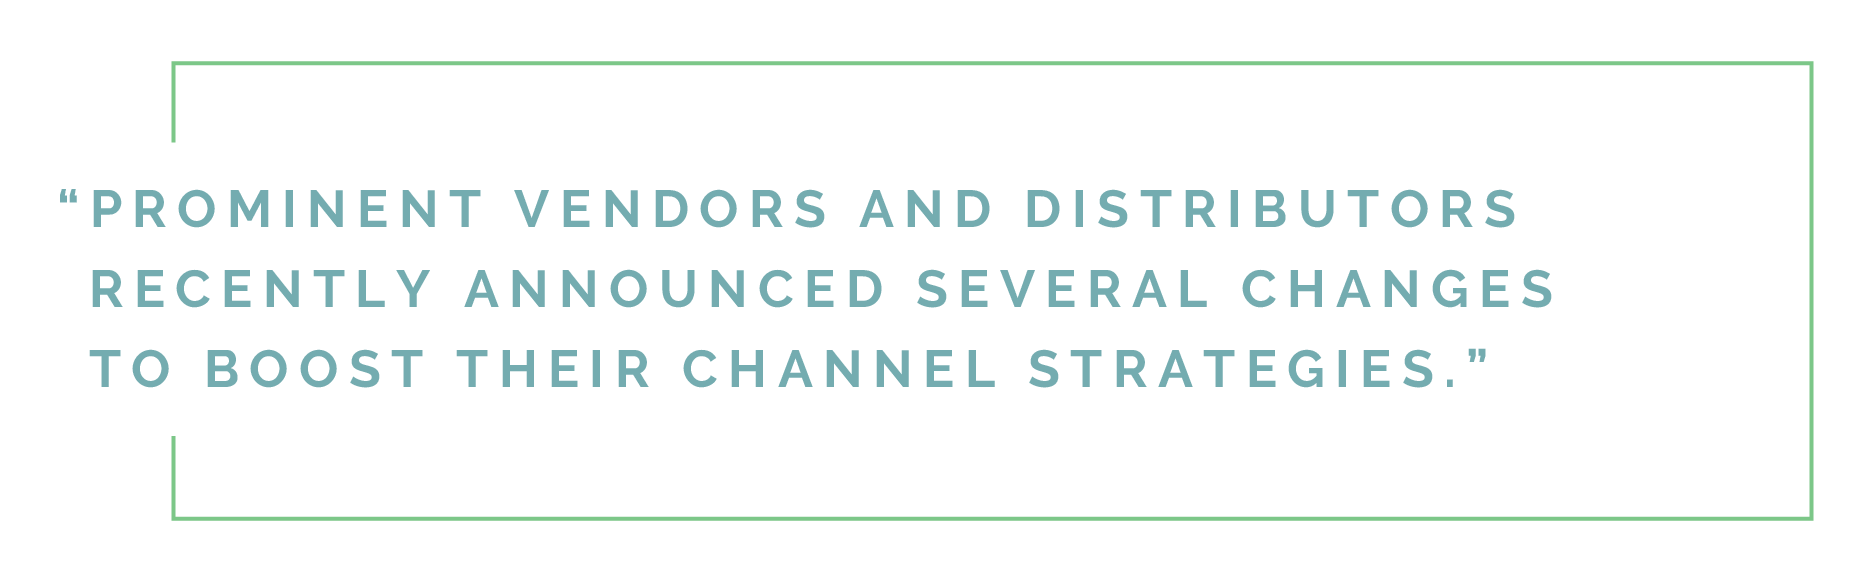 Channel strategies callout quote